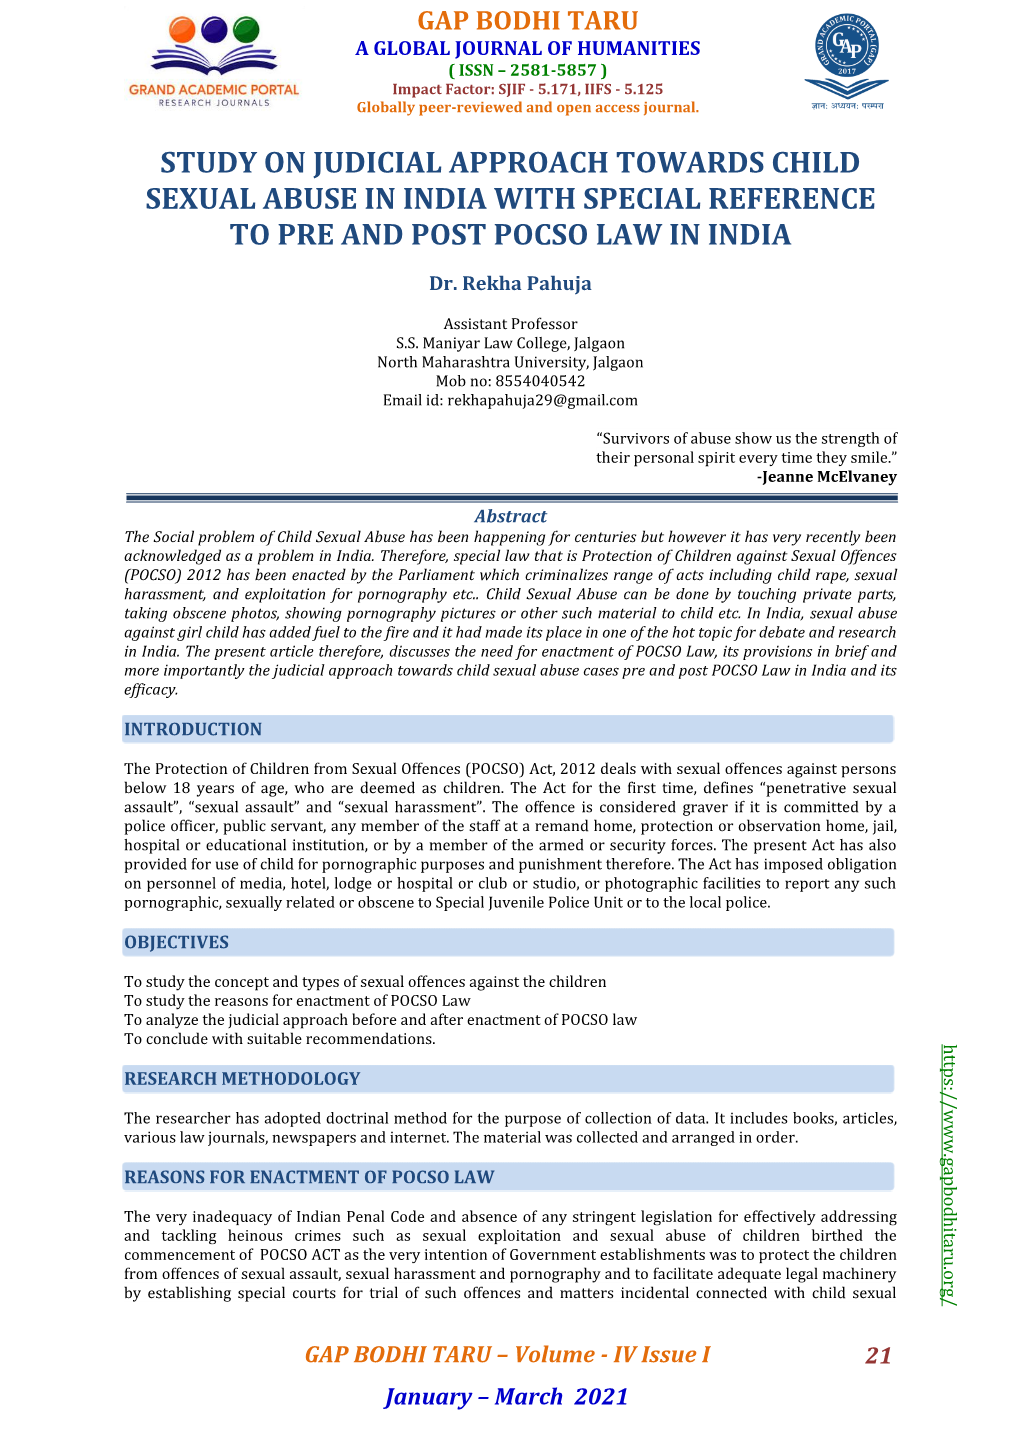 Study on Judicial Approach Towards Child Sexual Abuse in India with Special Reference to Pre and Post Pocso Law in India